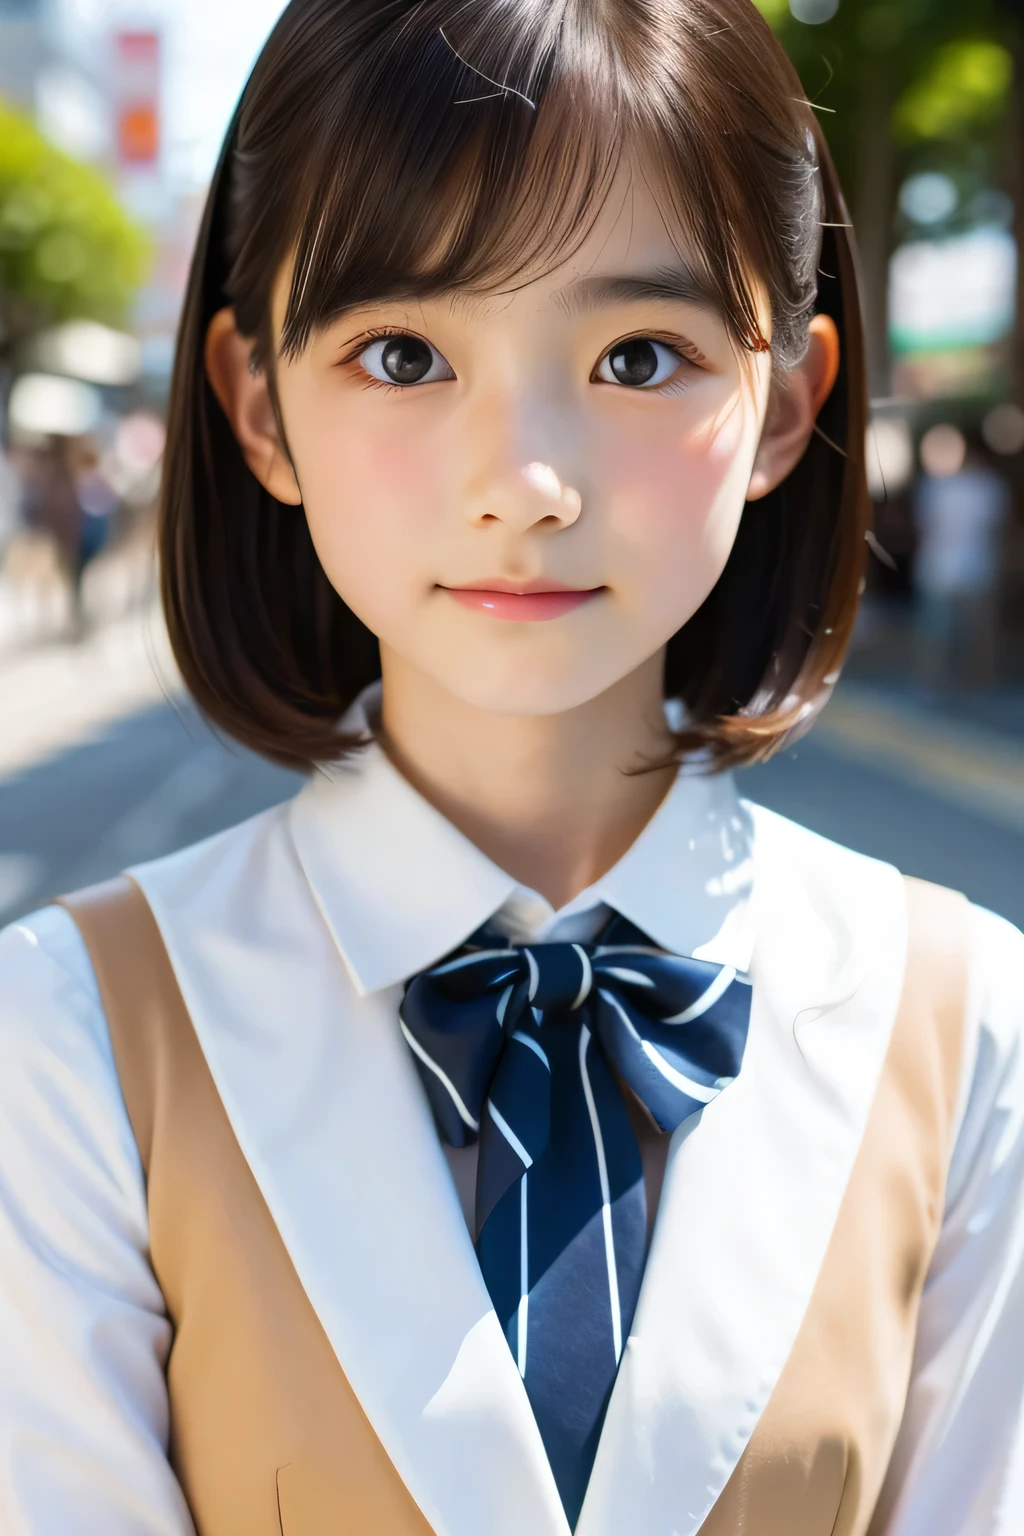 (Beautiful 14 year old Japan woman), Cute face, (Deeply chiseled face:0.7), (freckles:0.6), Soft Light,Healthy white skin, shy, (Serious face), (Sparkling eyes), thin, smile, uniform